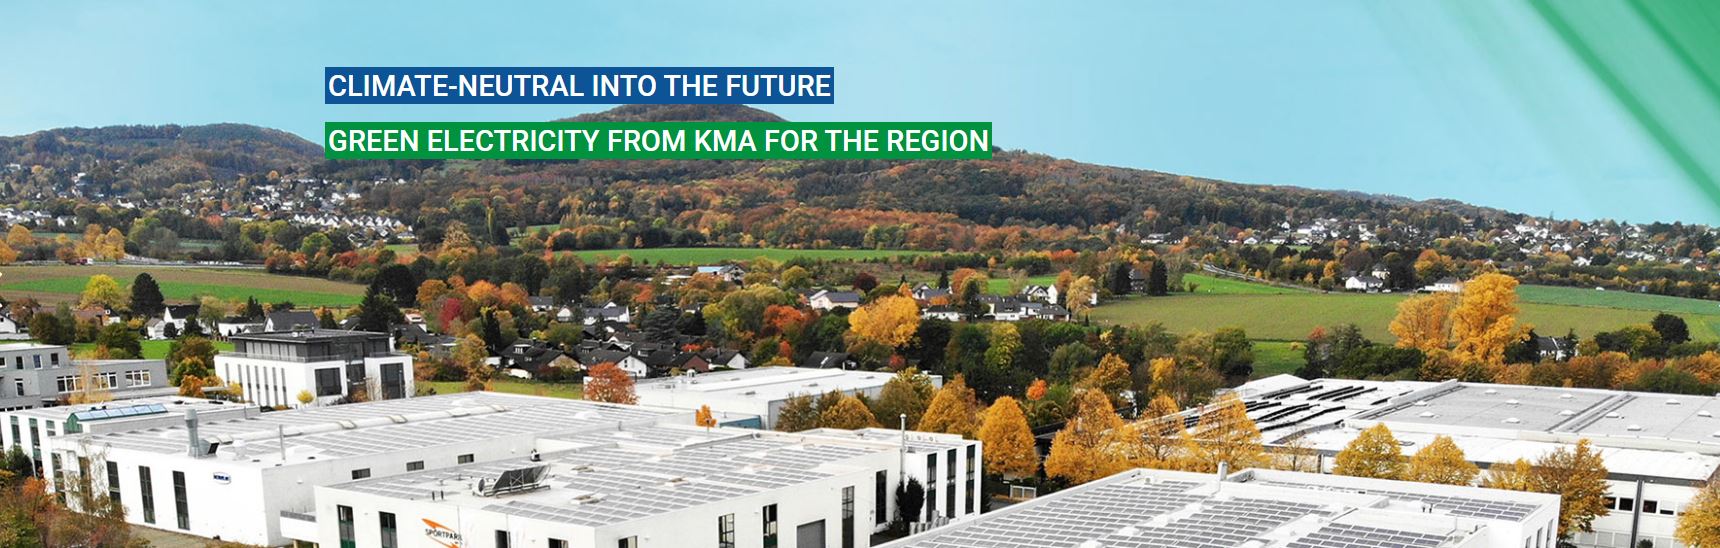 Green electricity from KMA for the region